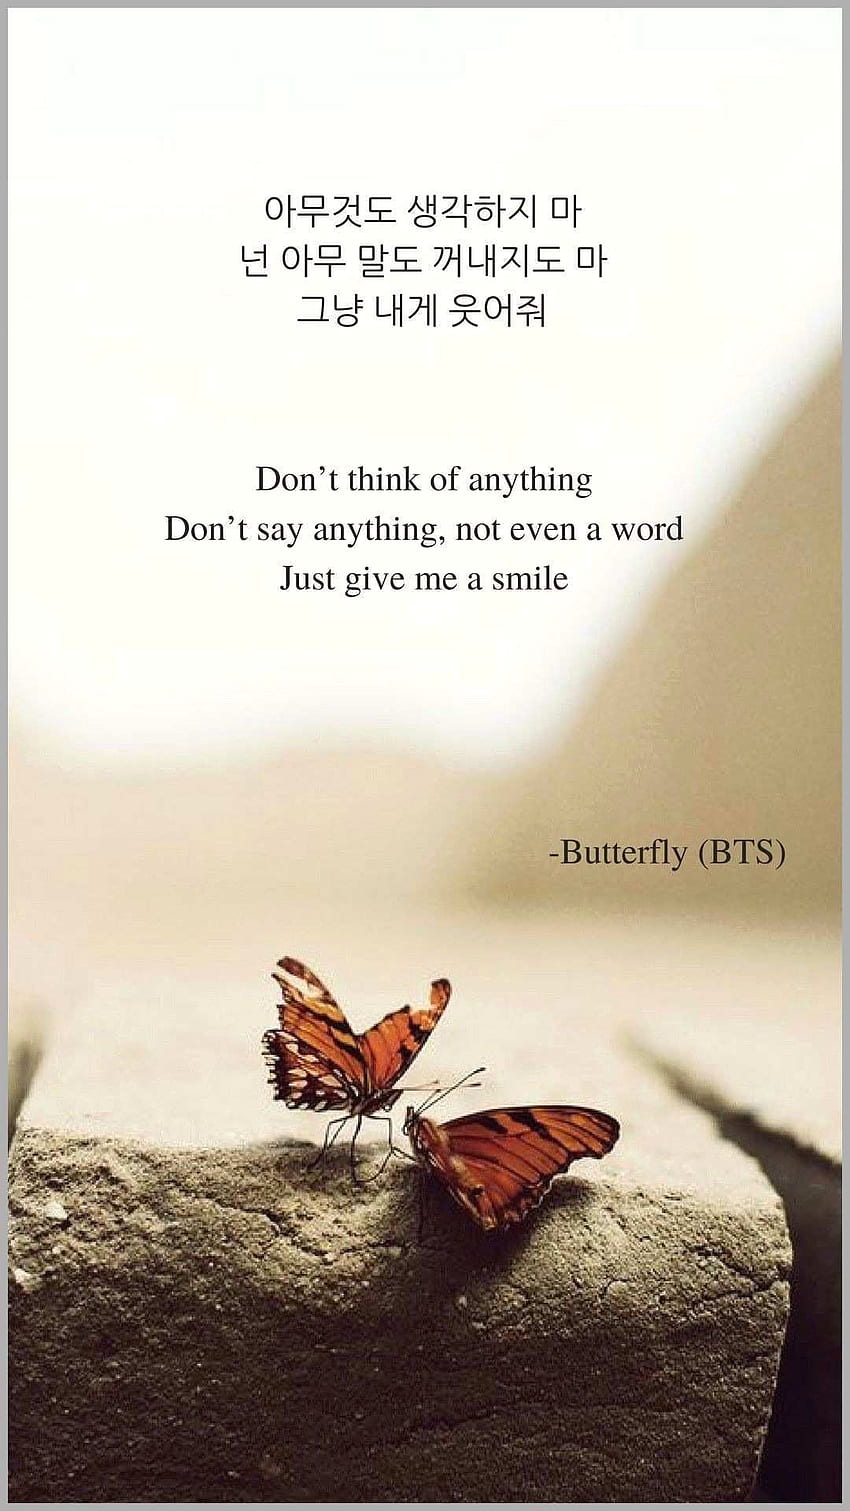 Unique Quotes Bts Fresh Just Give A Smile in 2020. Bts lyric, Bts lyrics quotes, Bts lyrics, Butterfly Quotes HD phone wallpaper